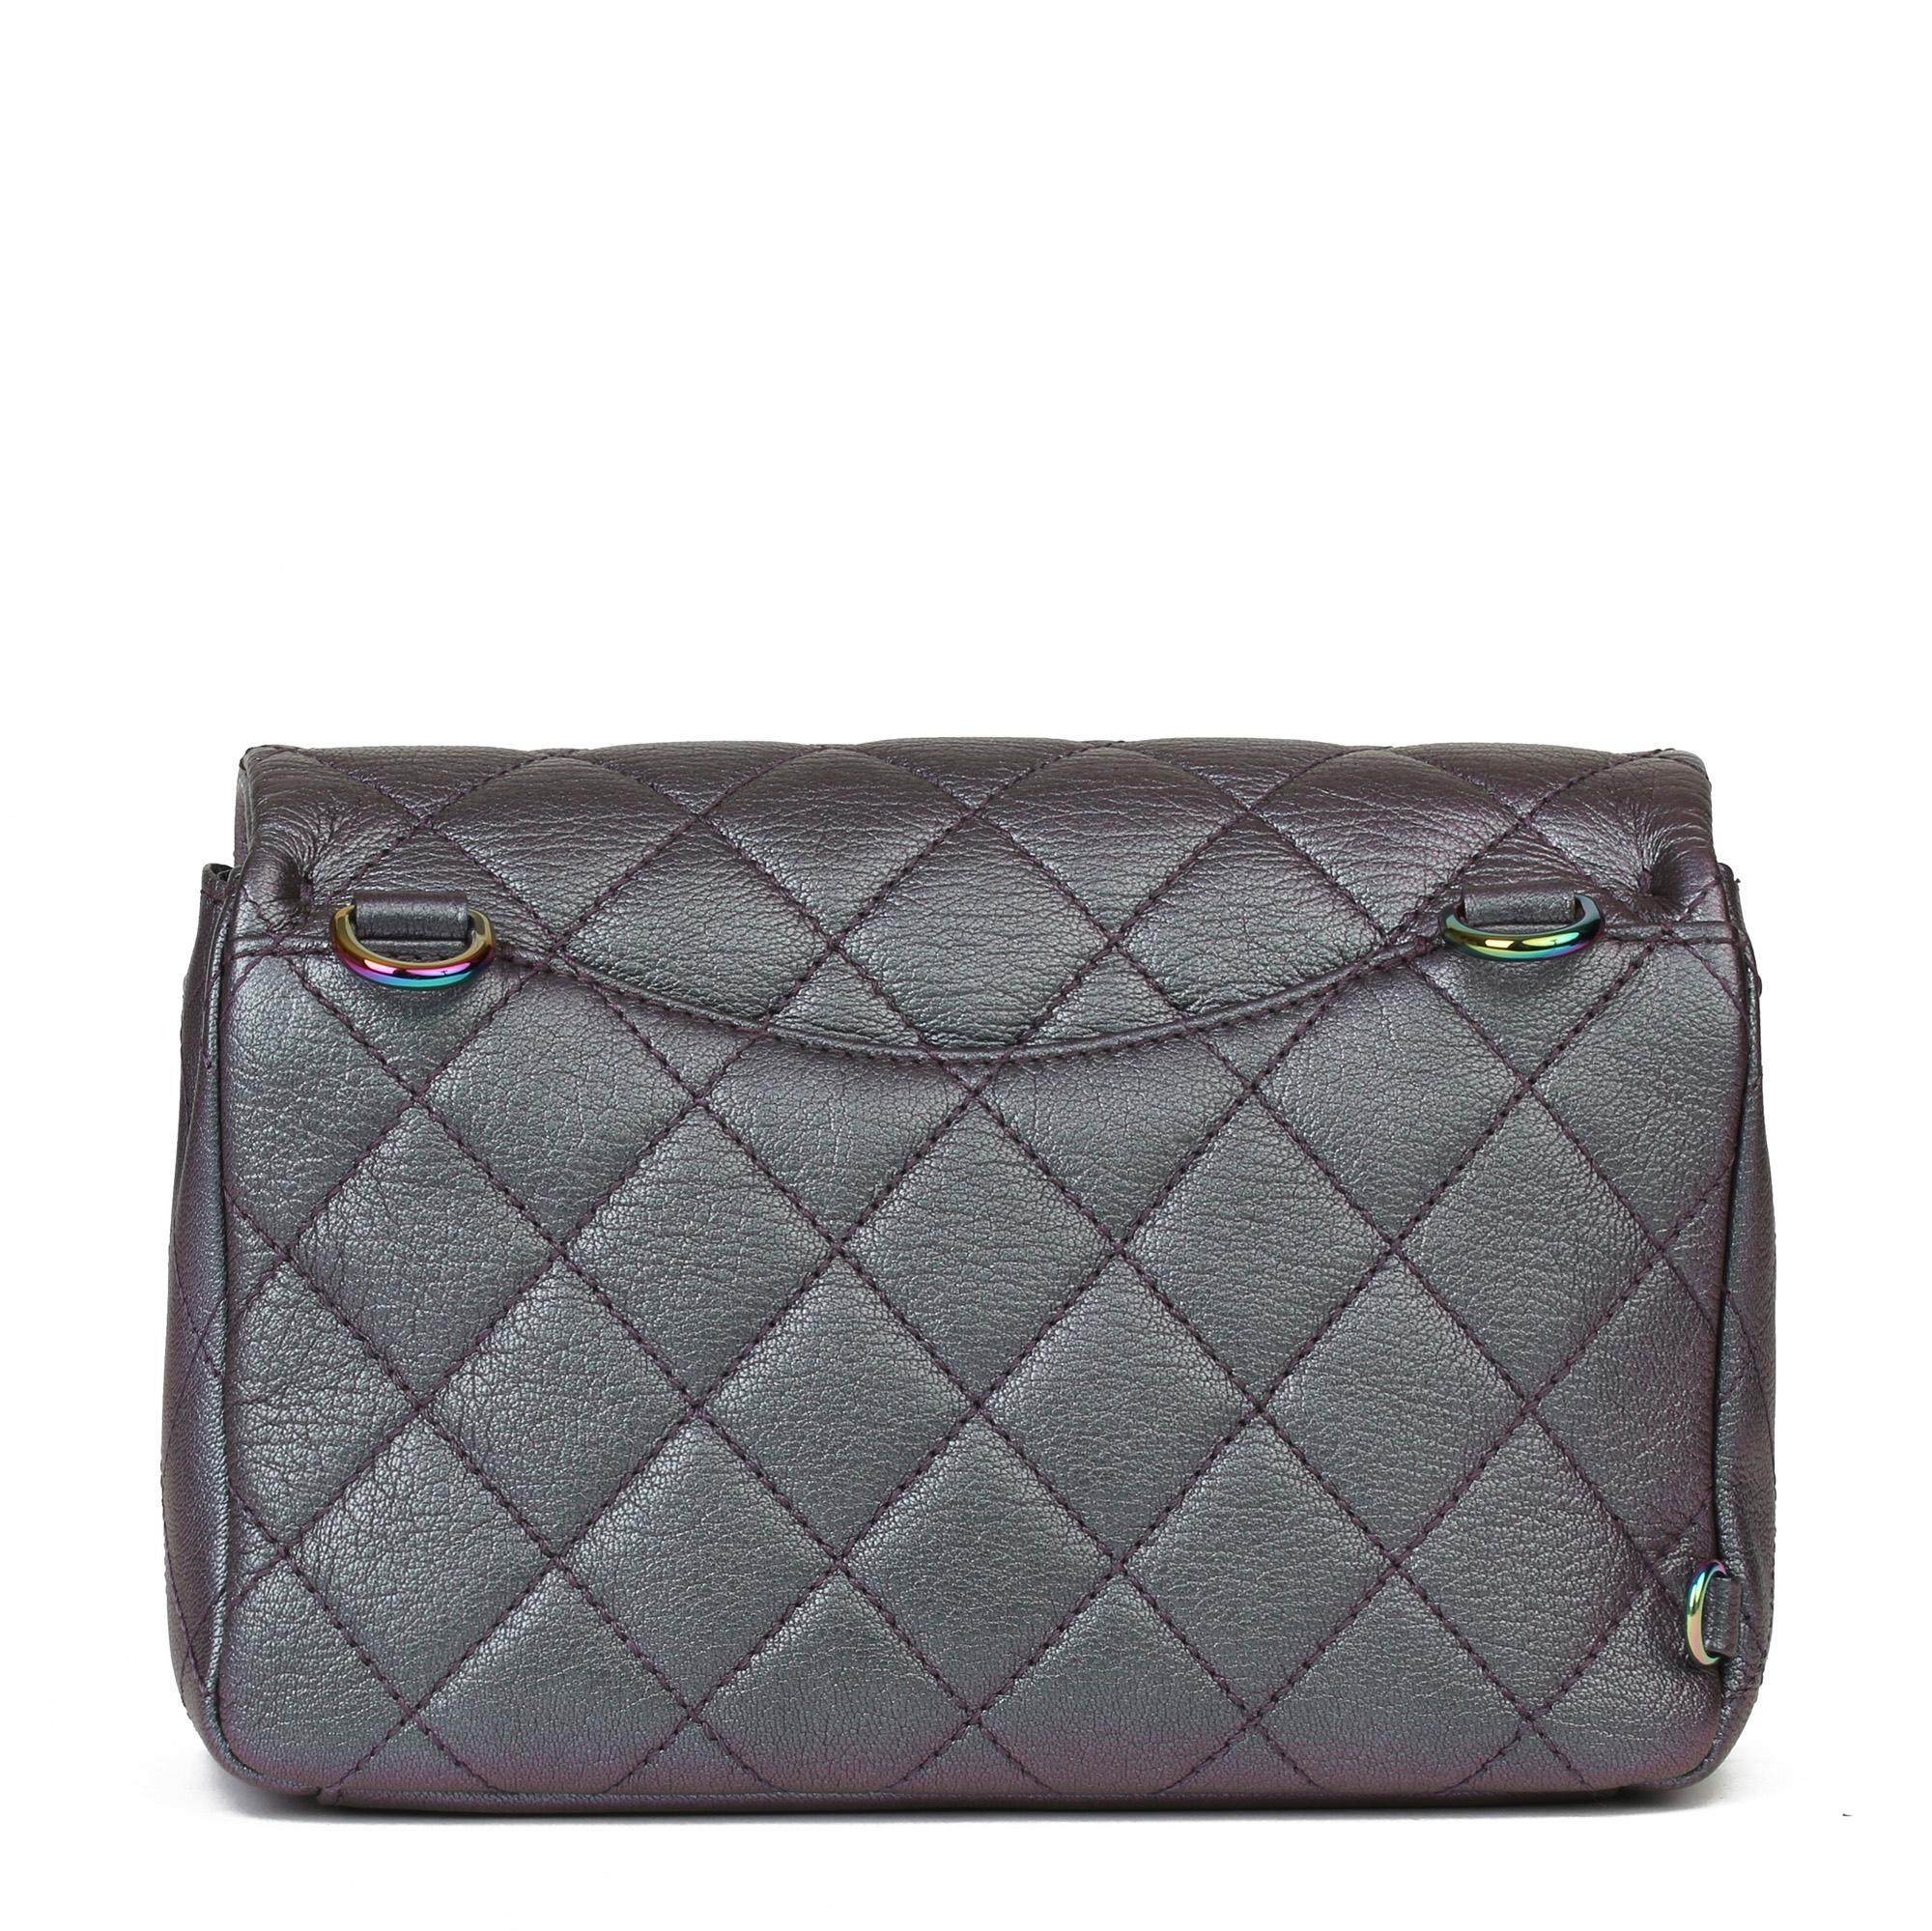 2016 Chanel Iridescent Quilted Calfskin Leather Small Double Carry Flap Bag In Excellent Condition In Bishop's Stortford, Hertfordshire